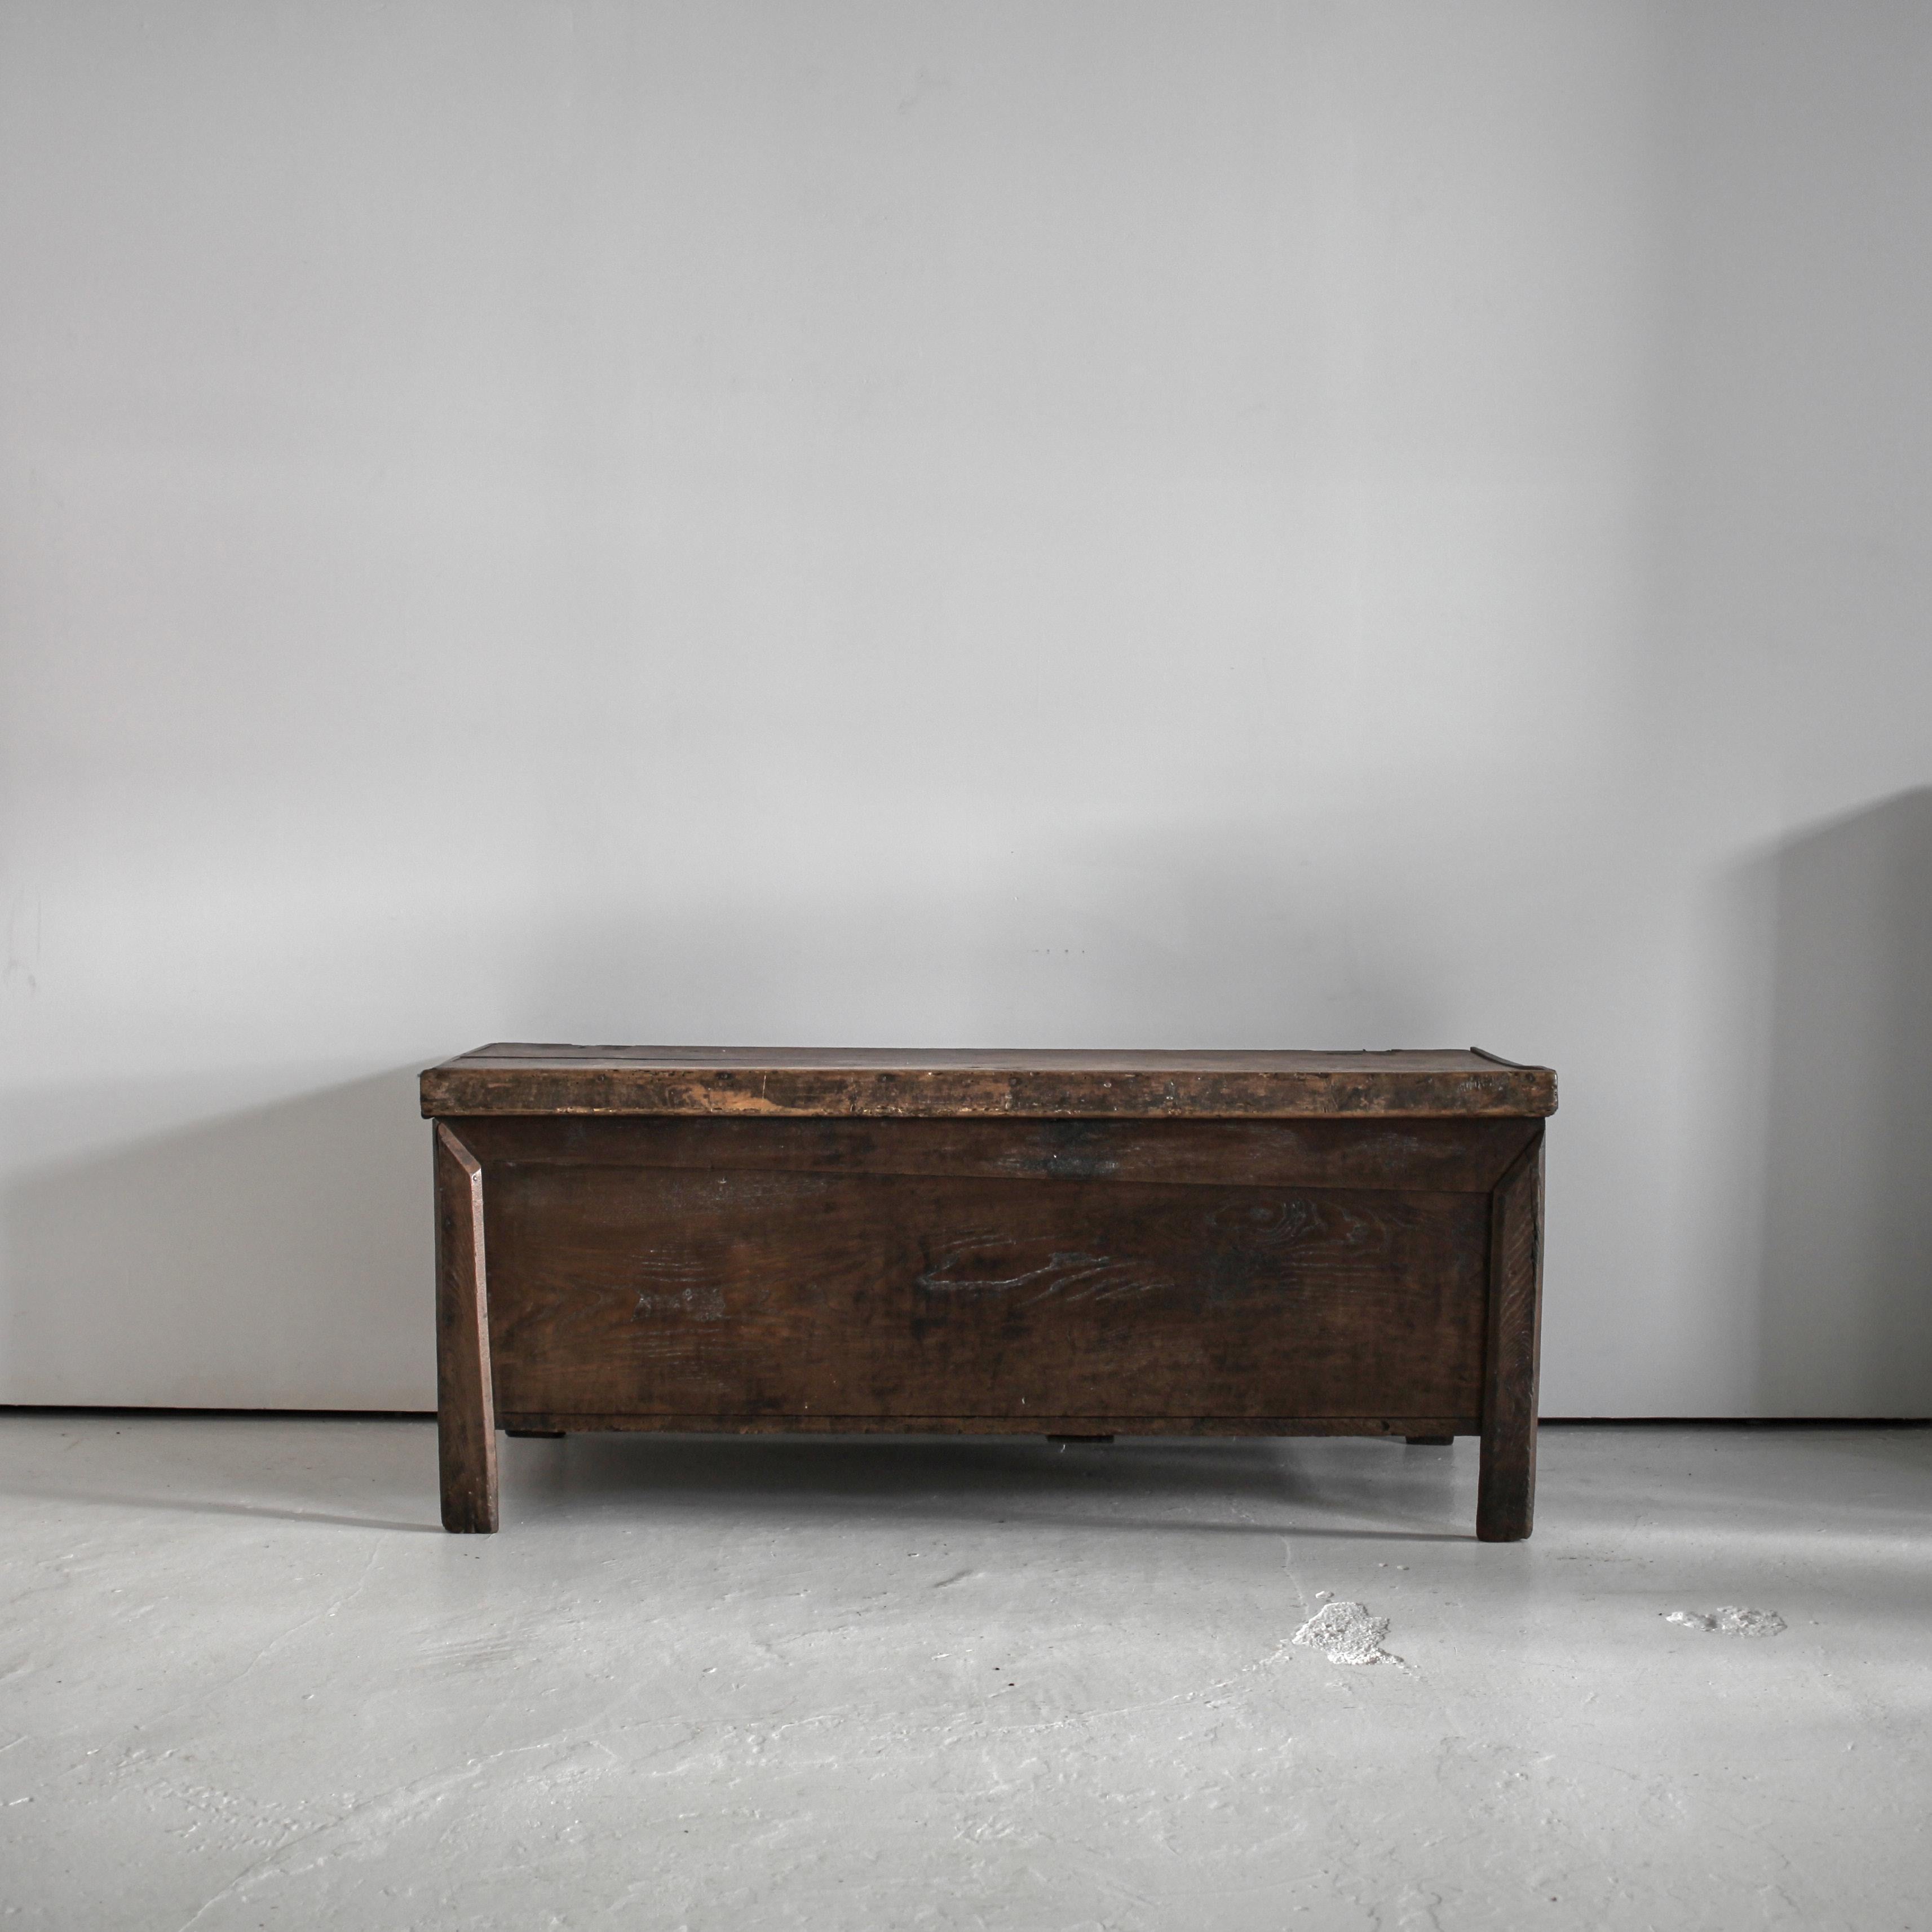 An XL northern Portuguese hewn chestnut coffer from the mid 19th C.

Beautiful patination with age old repairs.

Perfect as a console and/or storage.